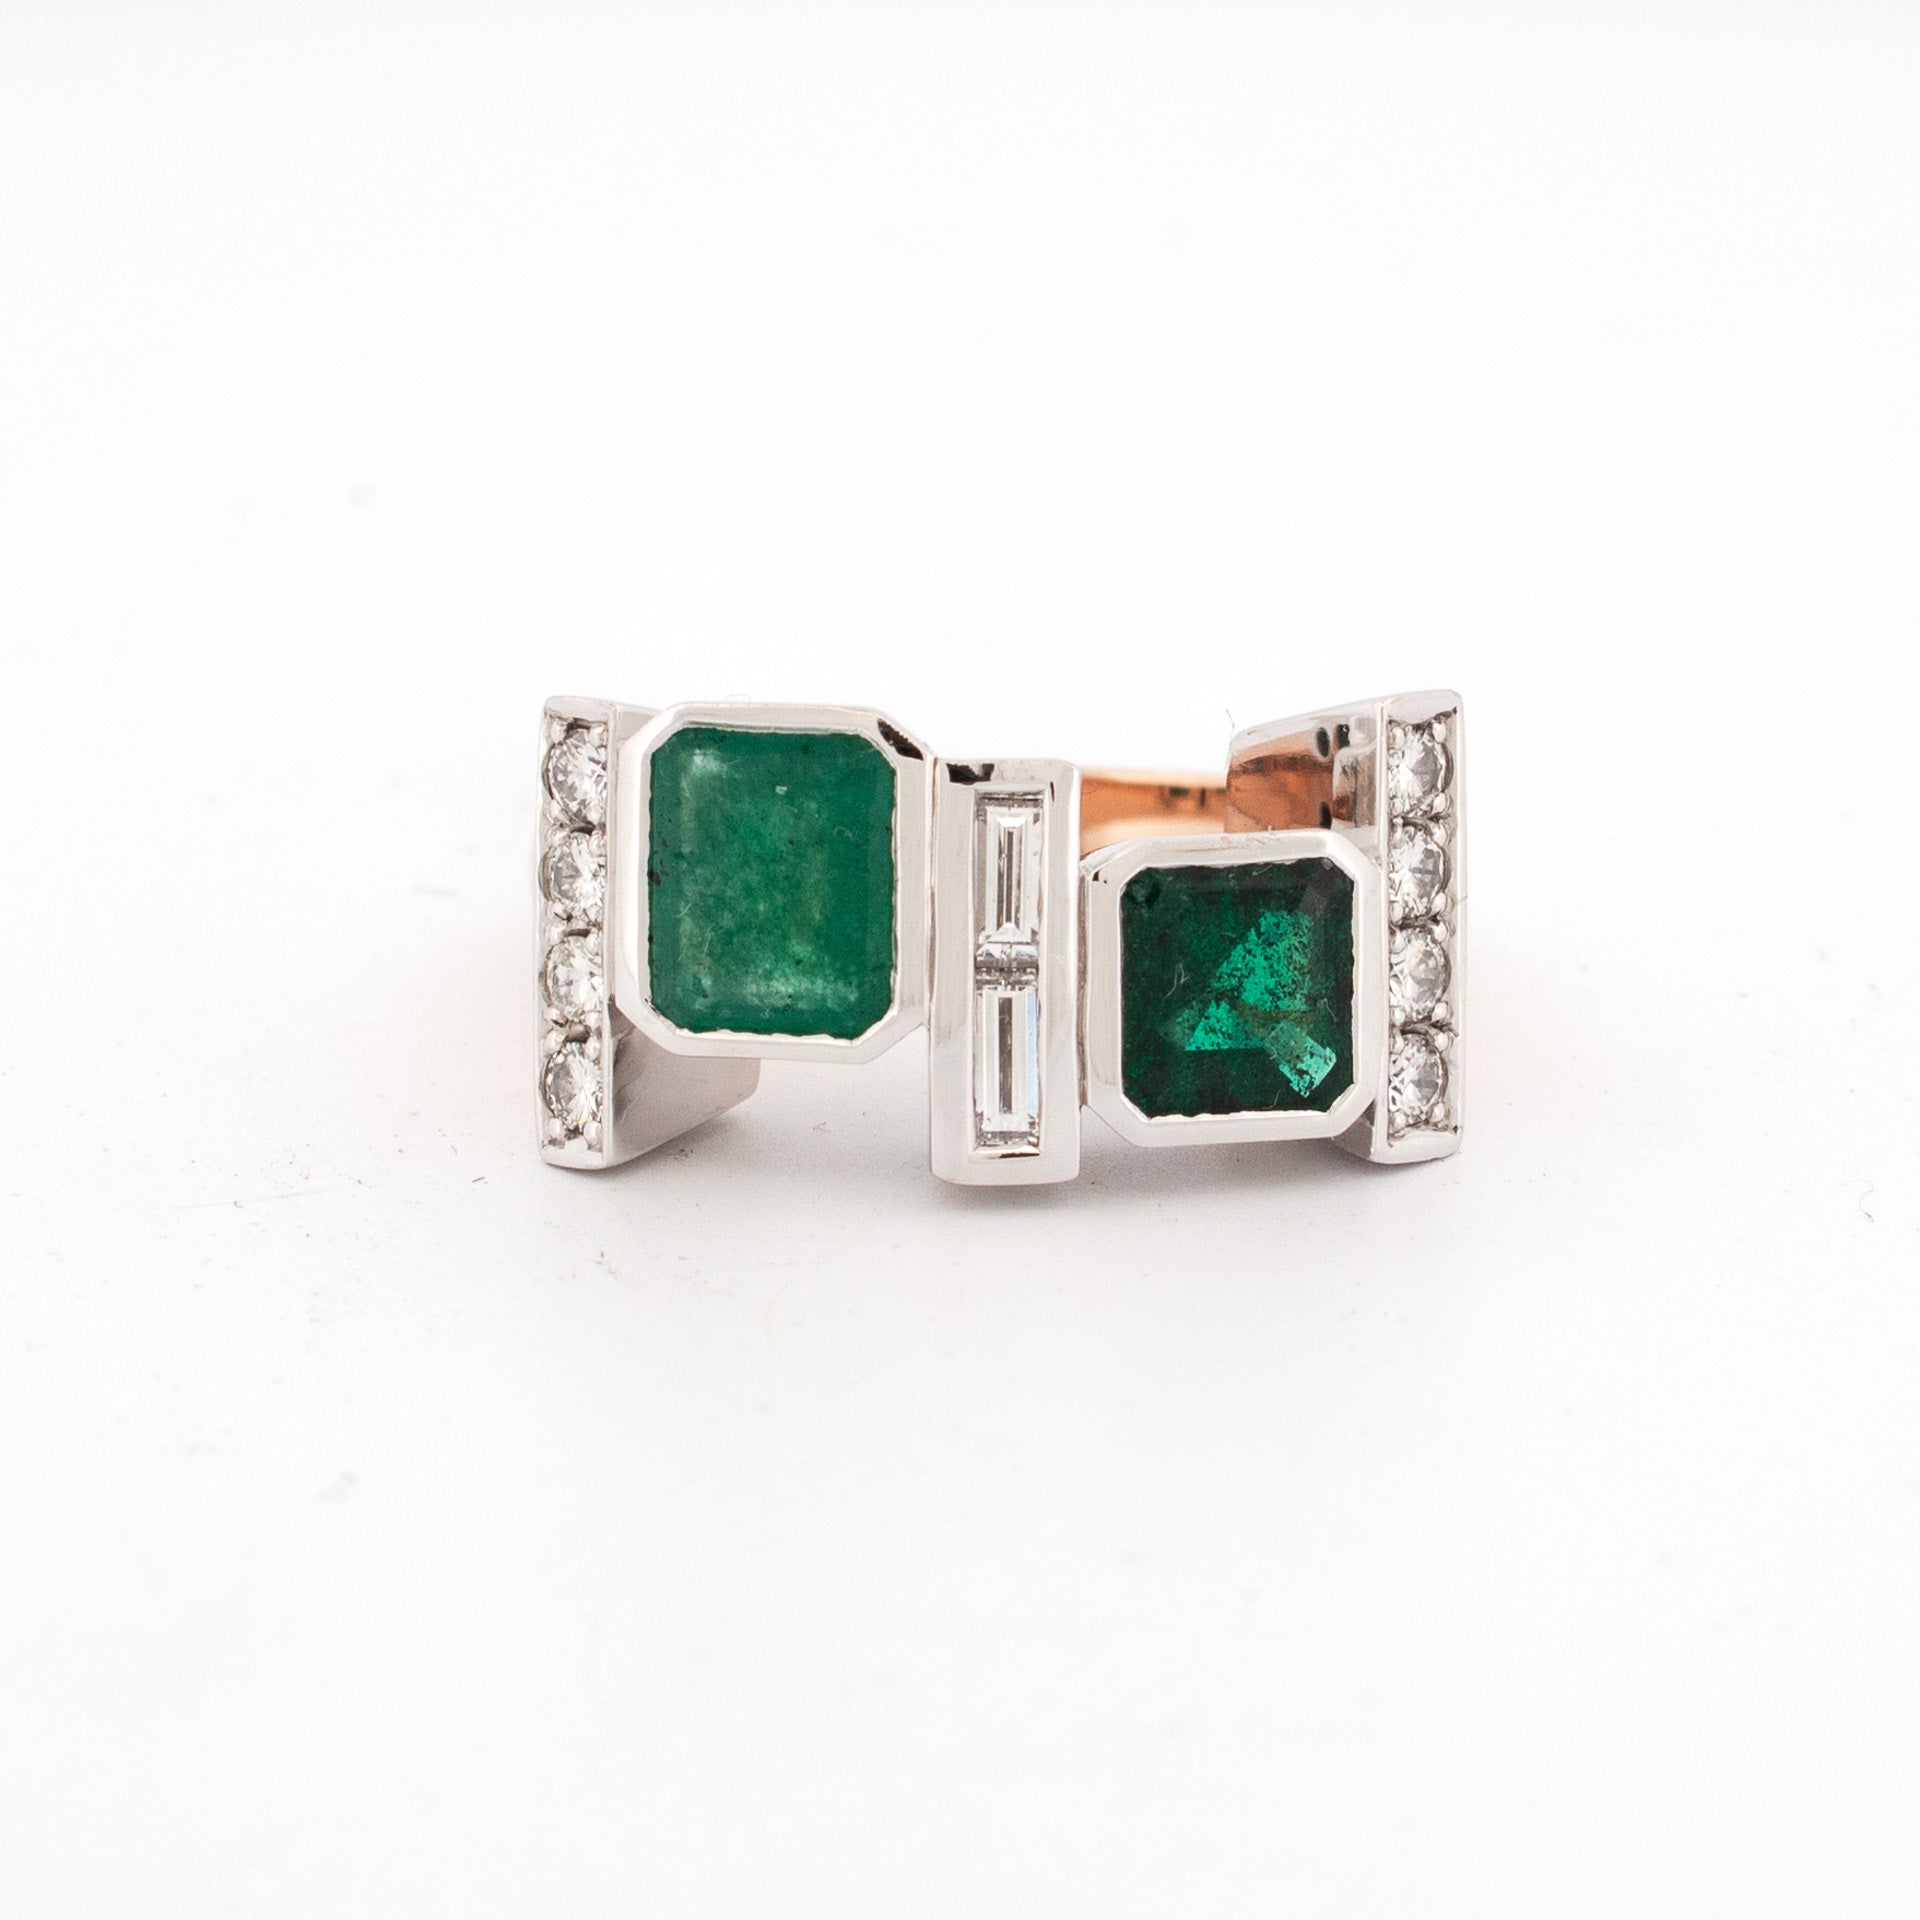 Recycled Emerald Ring